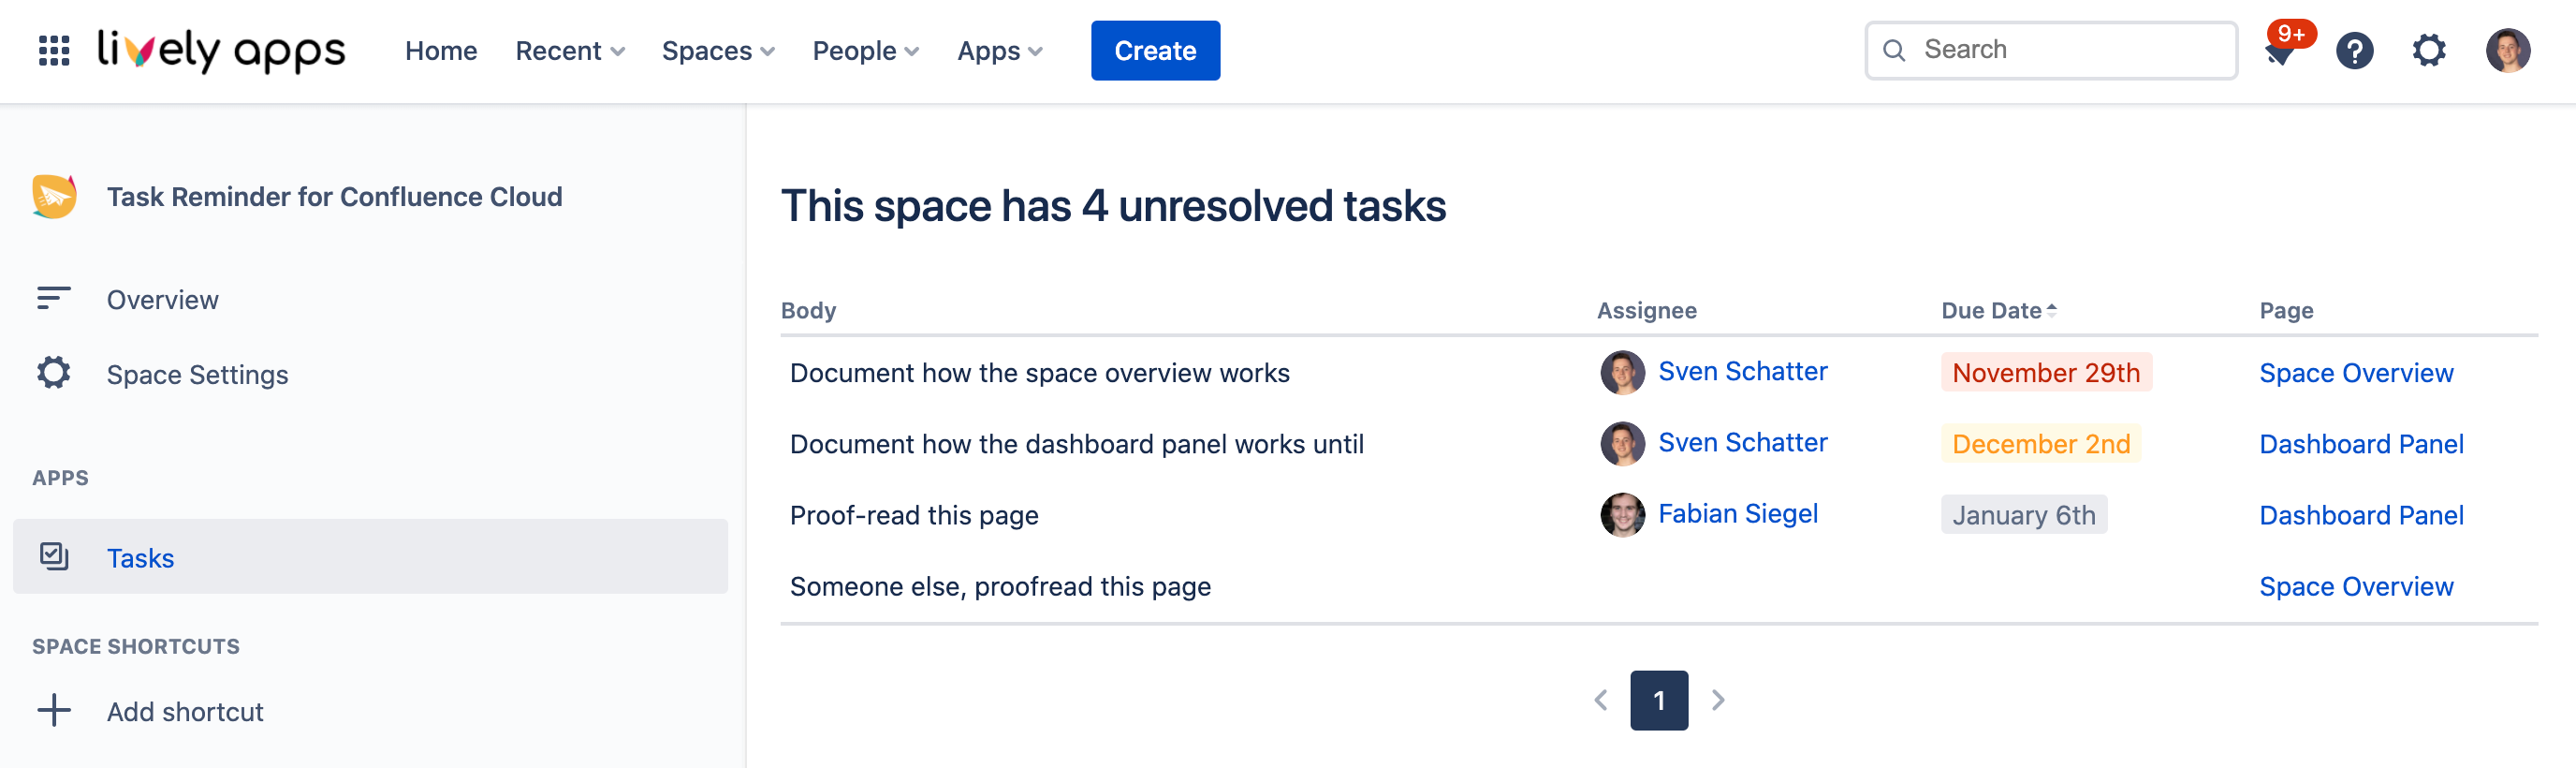 See all unresolved tasks in your space in a neat overview